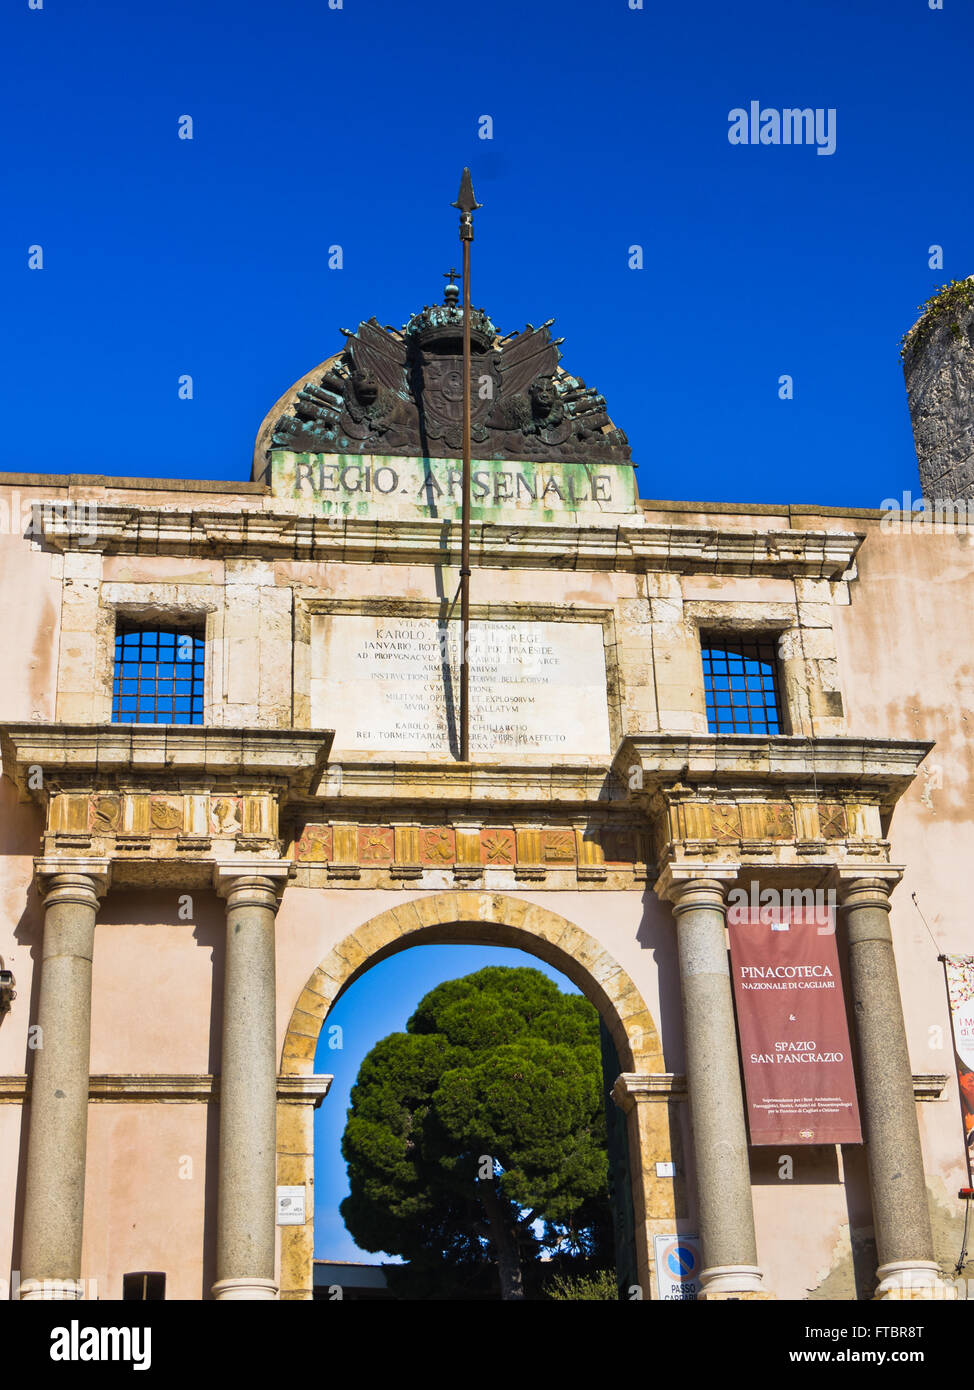 Regio arsenale gate at city square and entrance to archeological museum in Cagliari downtown, Sardinia Stock Photo